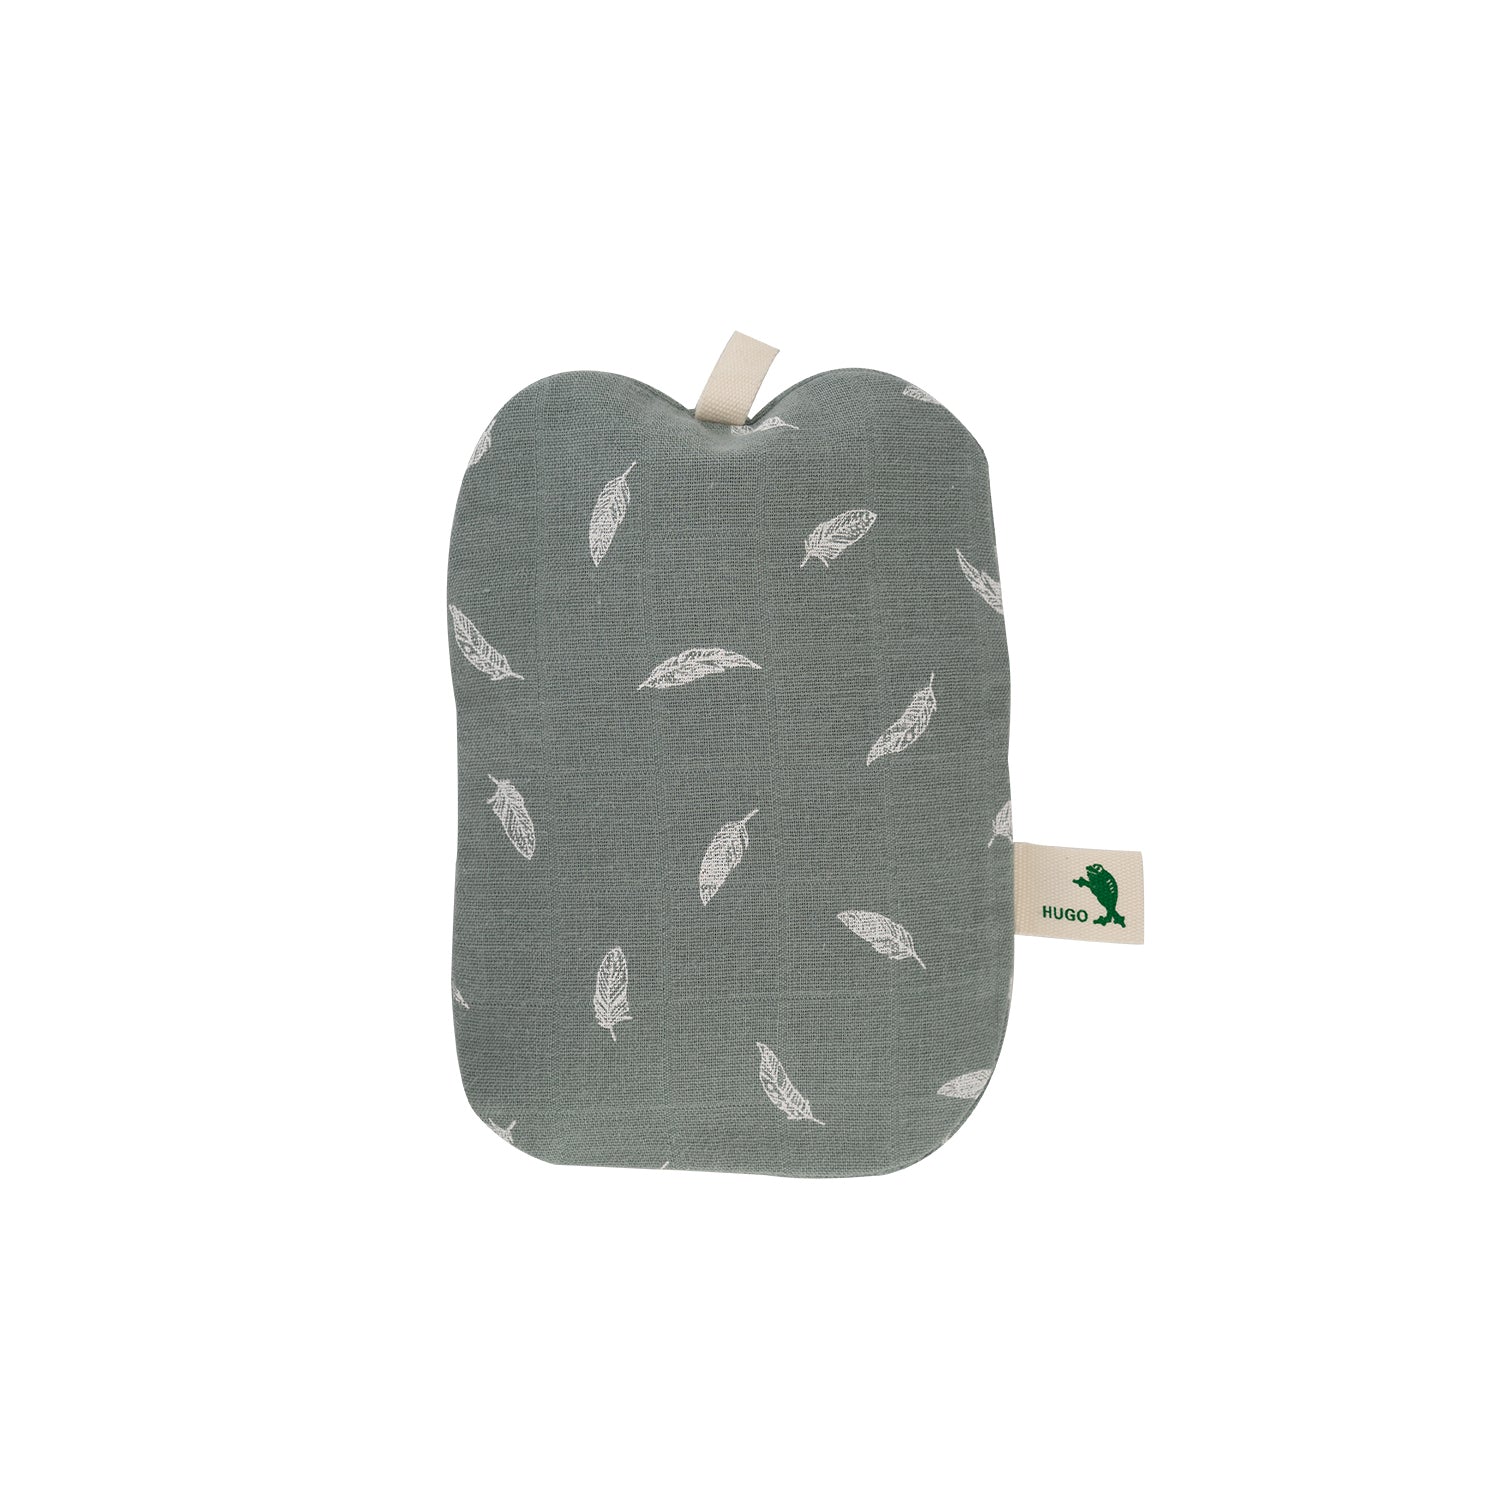 0.2 Litre Luxury Mini Hot Water Bottle with Pastel Green Feather Organic Cotton Cover (rubberless)